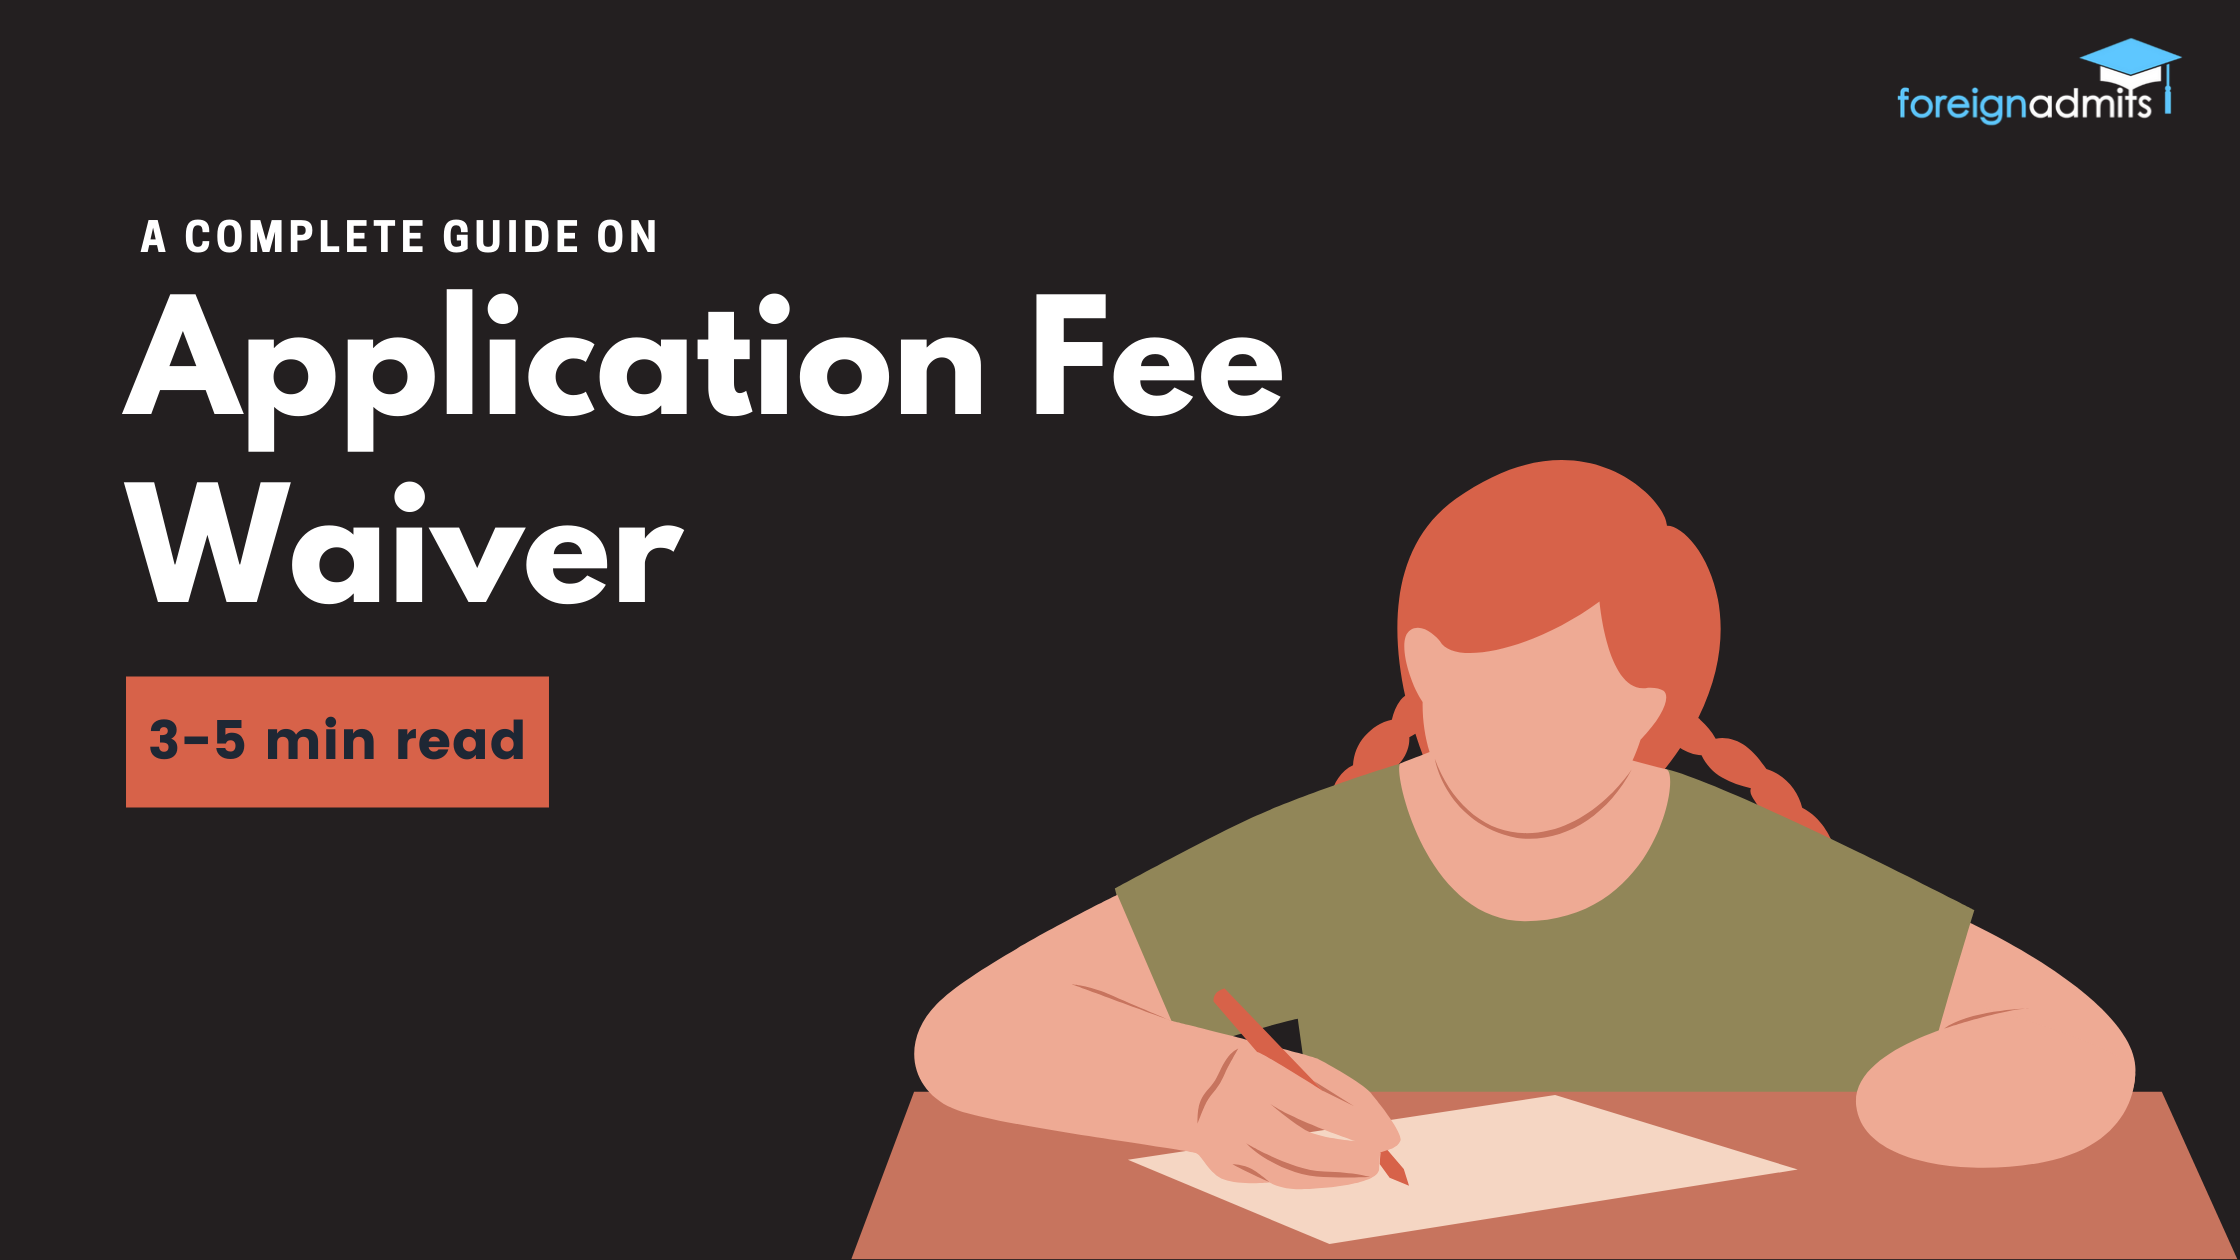 Application Fee Waiver: A Complete Guide